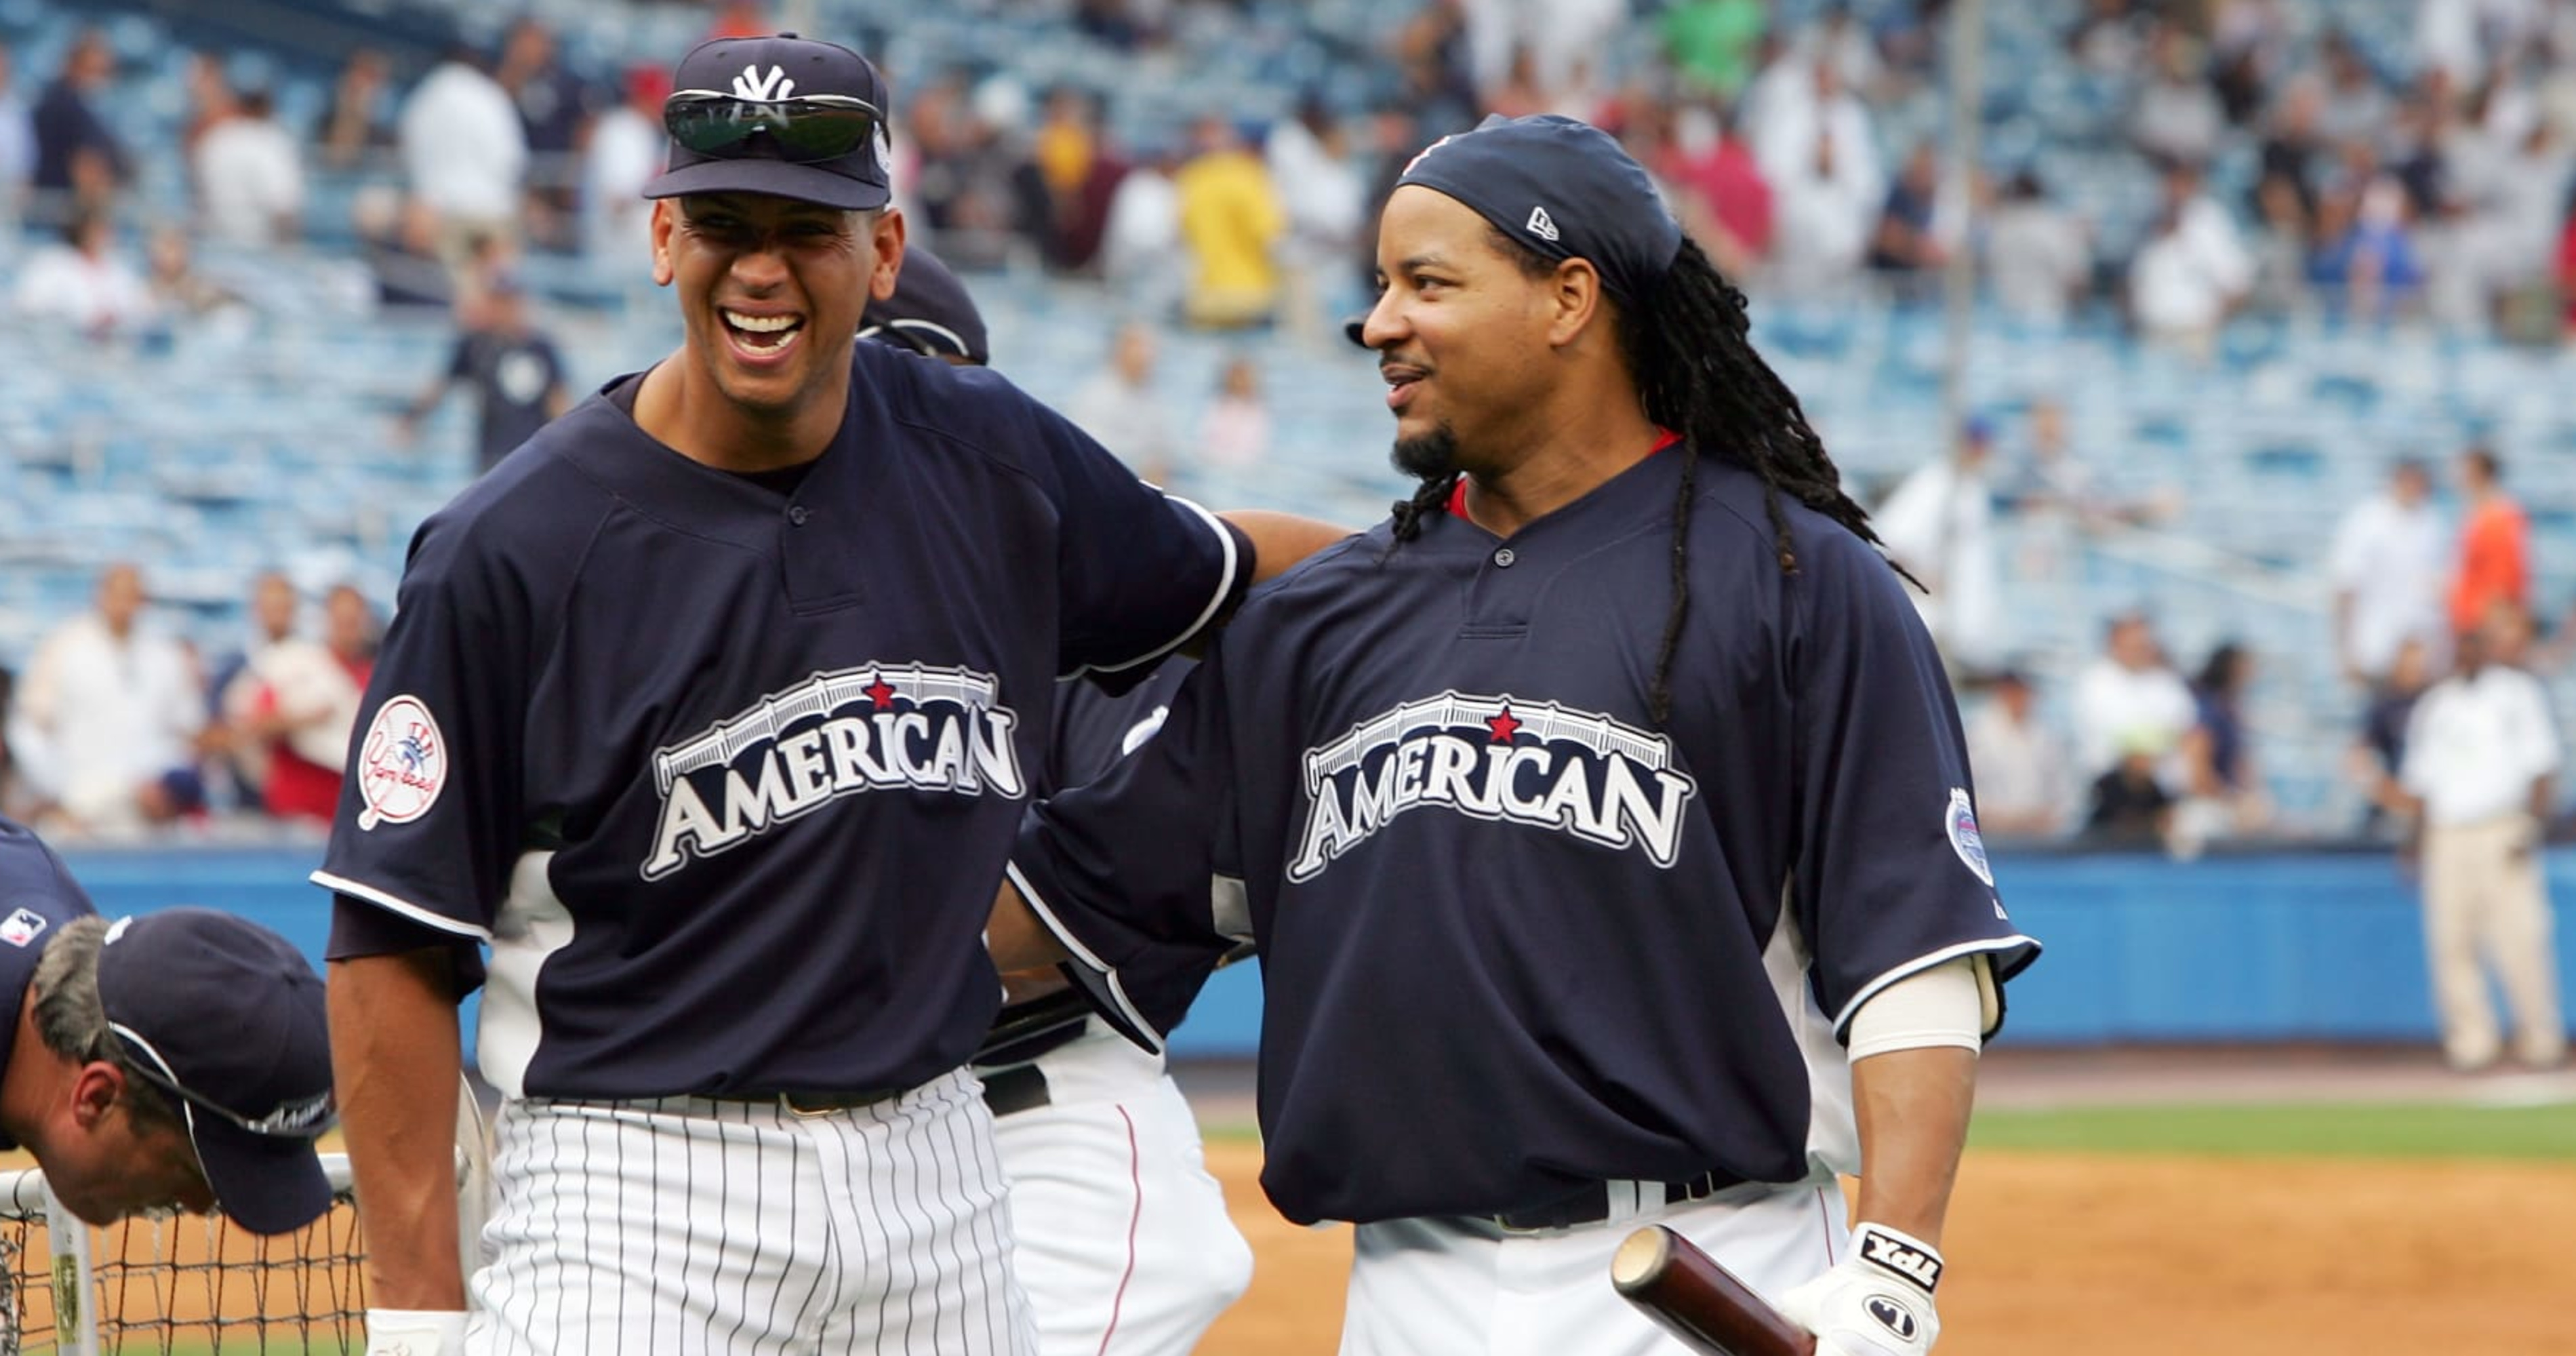 Poll: Is Manny Ramirez a Hall of Famer? - Lone Star Ball